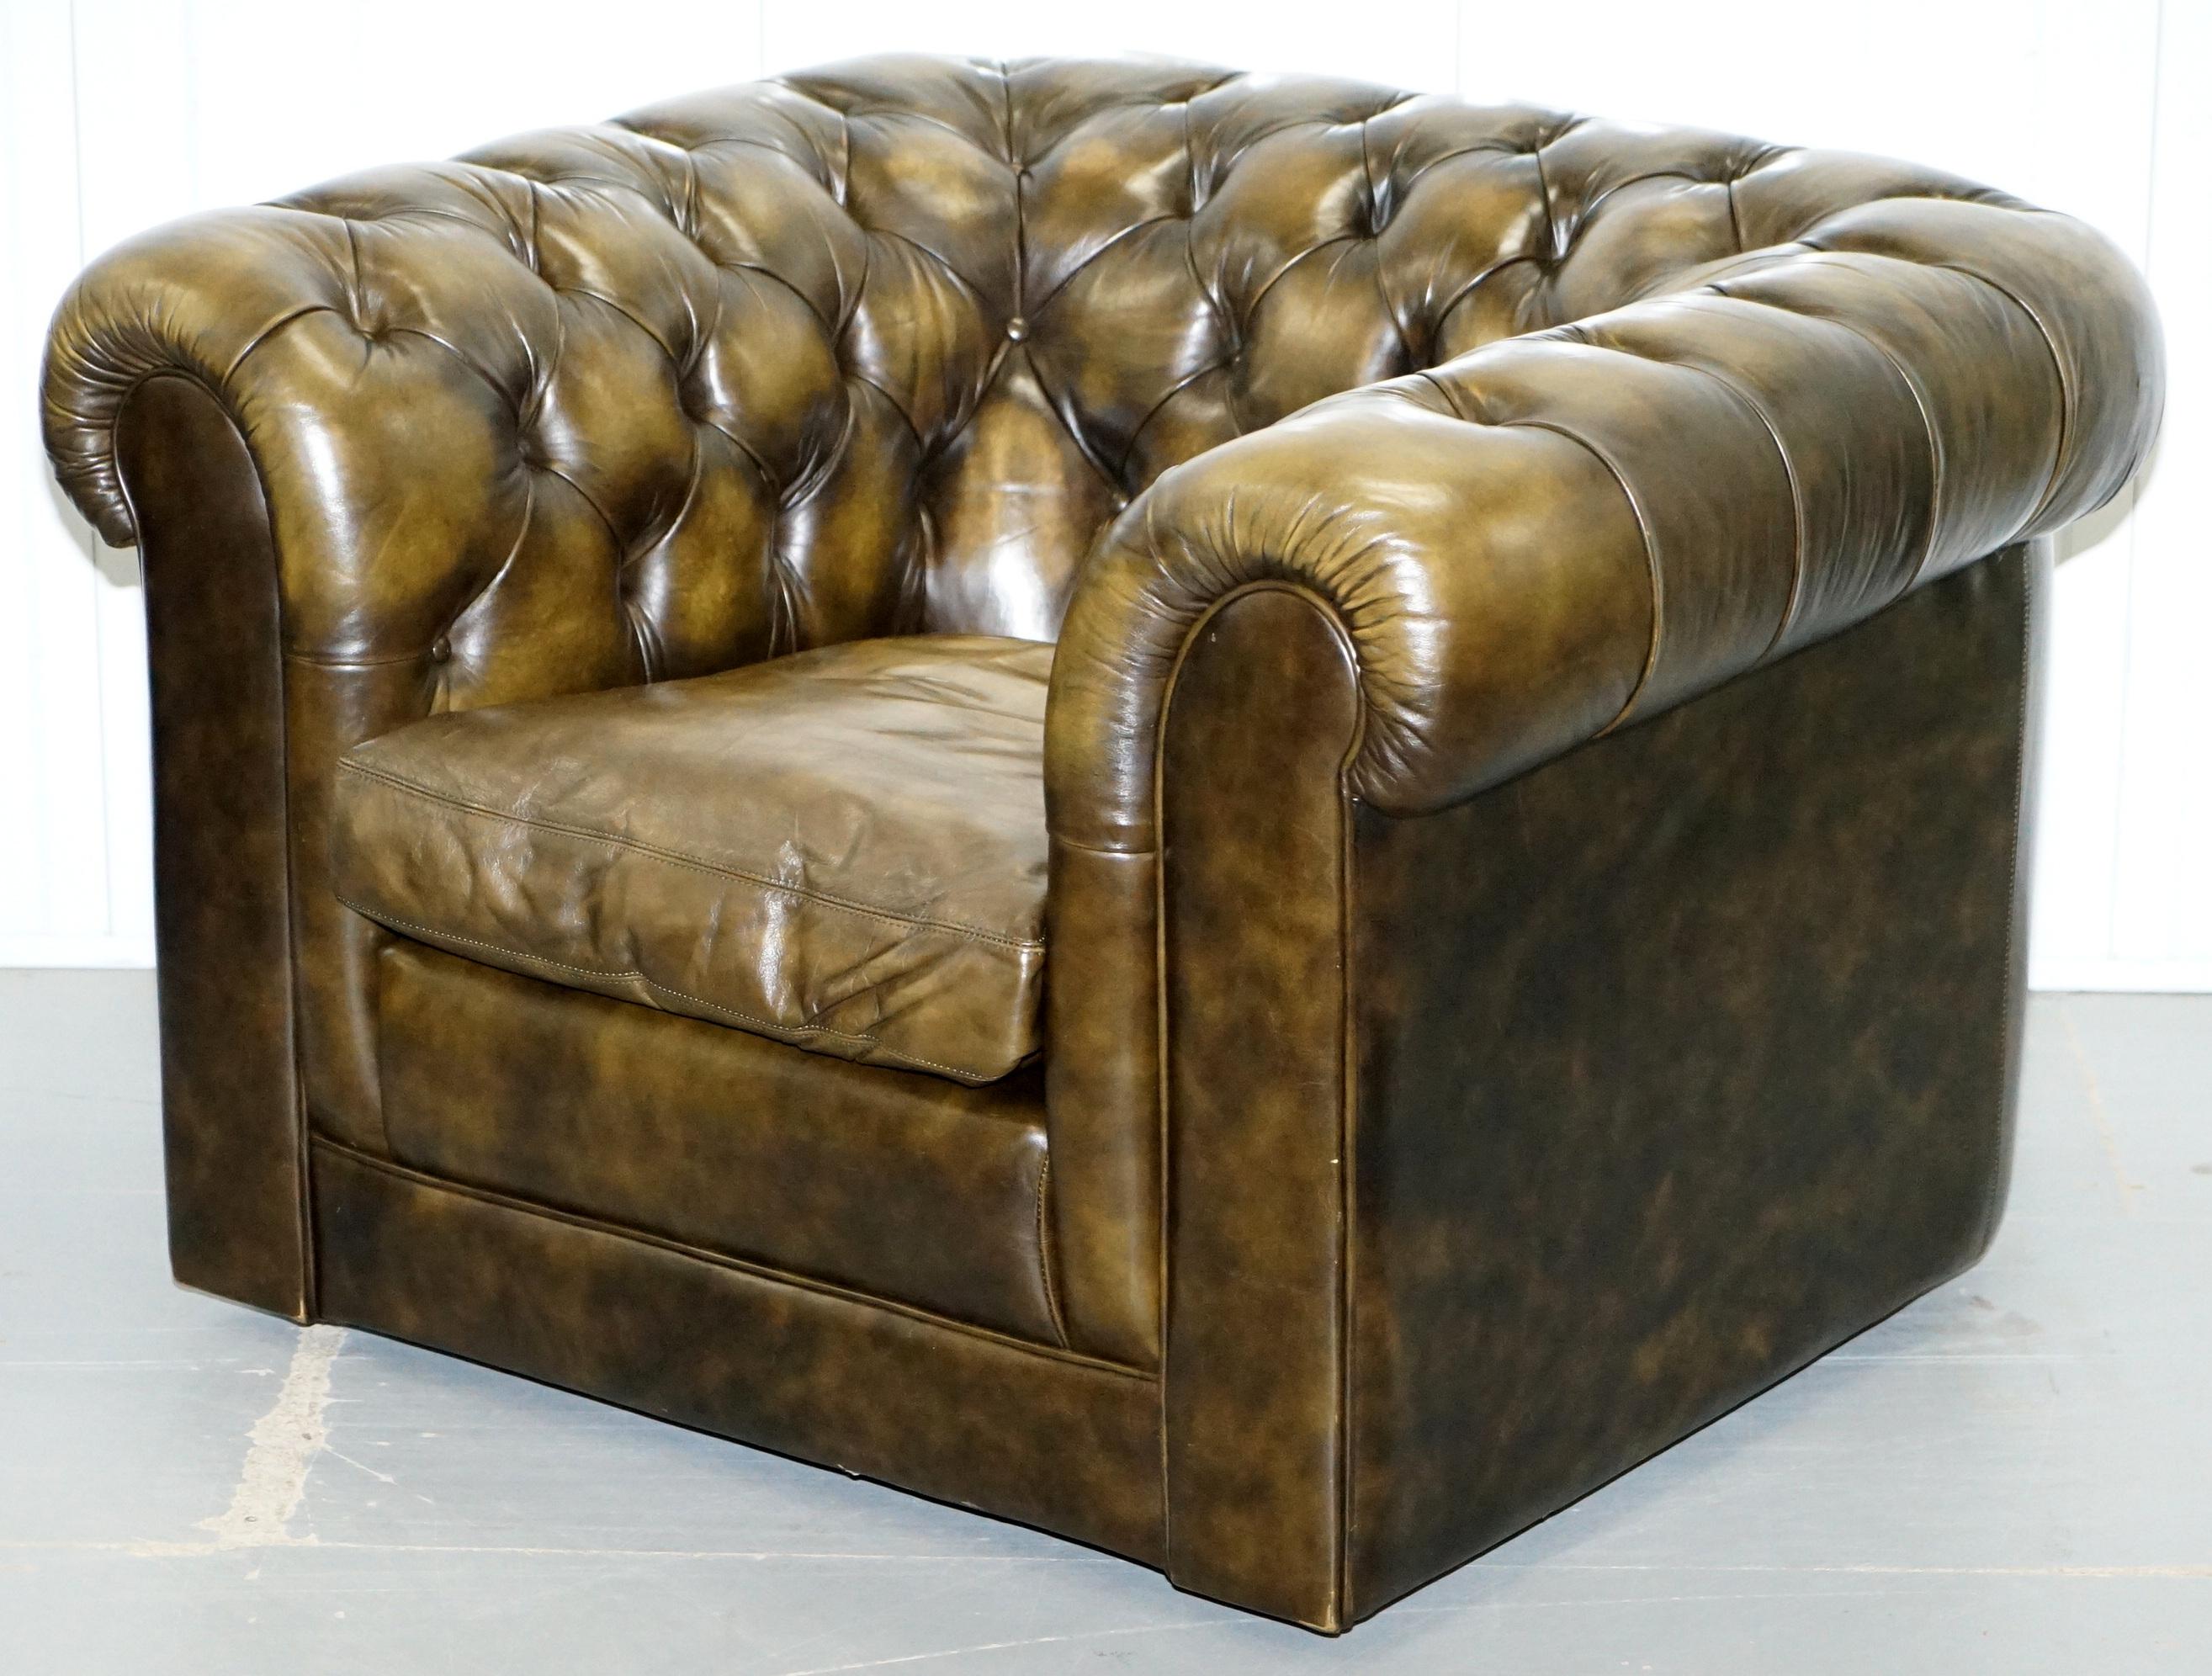 We are delighted to offer for sale one of two pairs of lovely vintage Chesterfield leather club armchairs with down filled feather cushions

The chairs are a lovely brownish green color, very 1960s, the cushions are down filled and very comfortable,